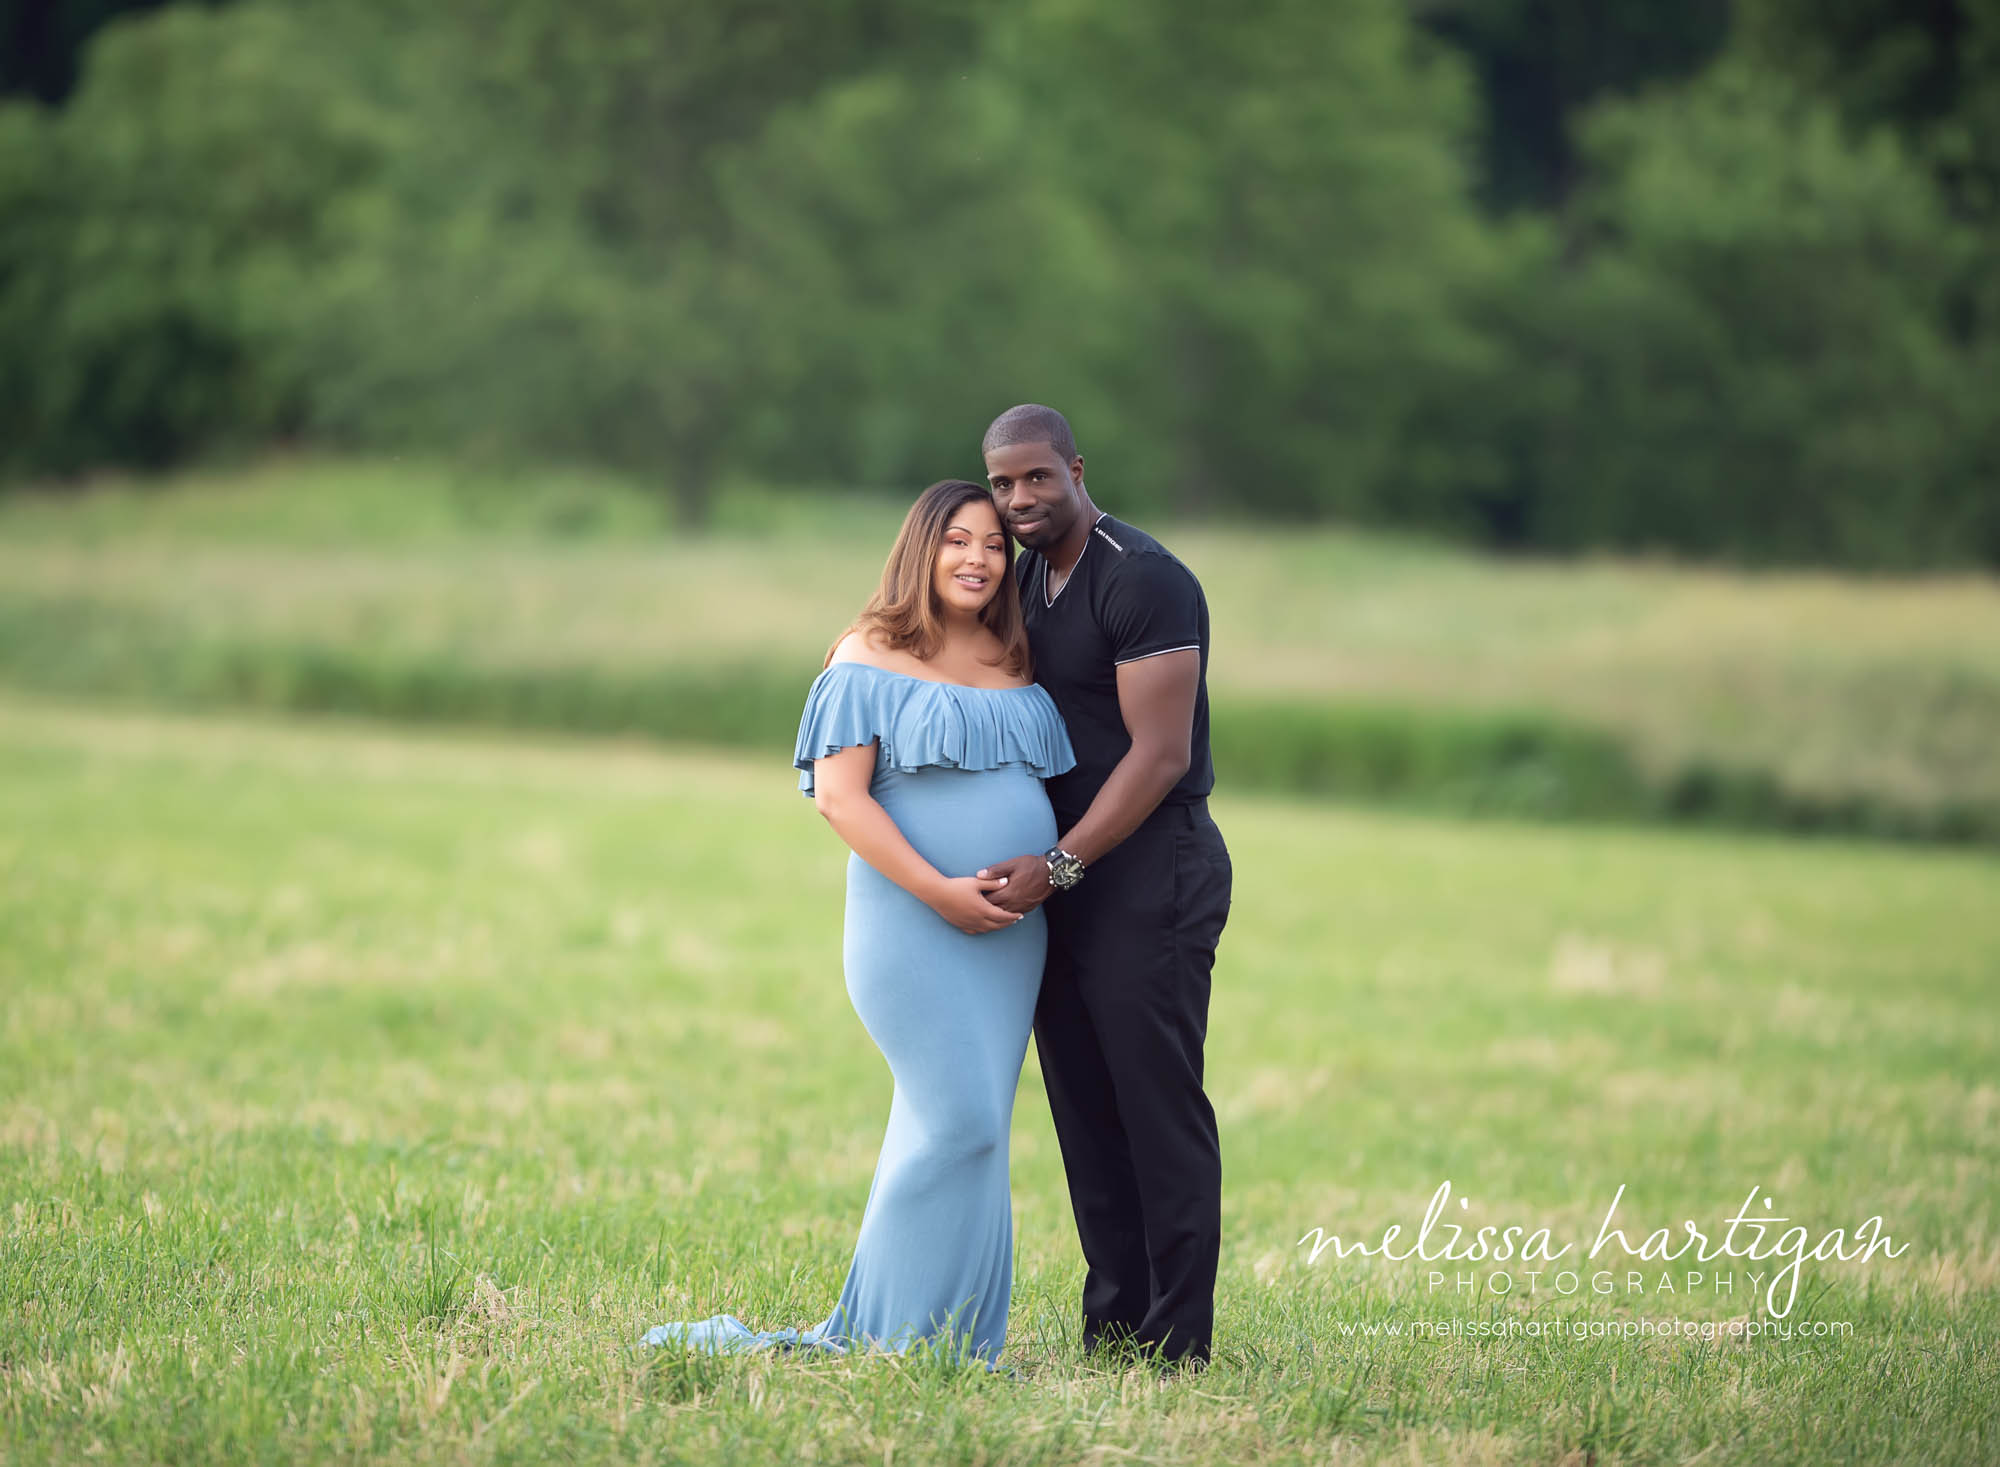 standing maternity couples pose holding baby bump